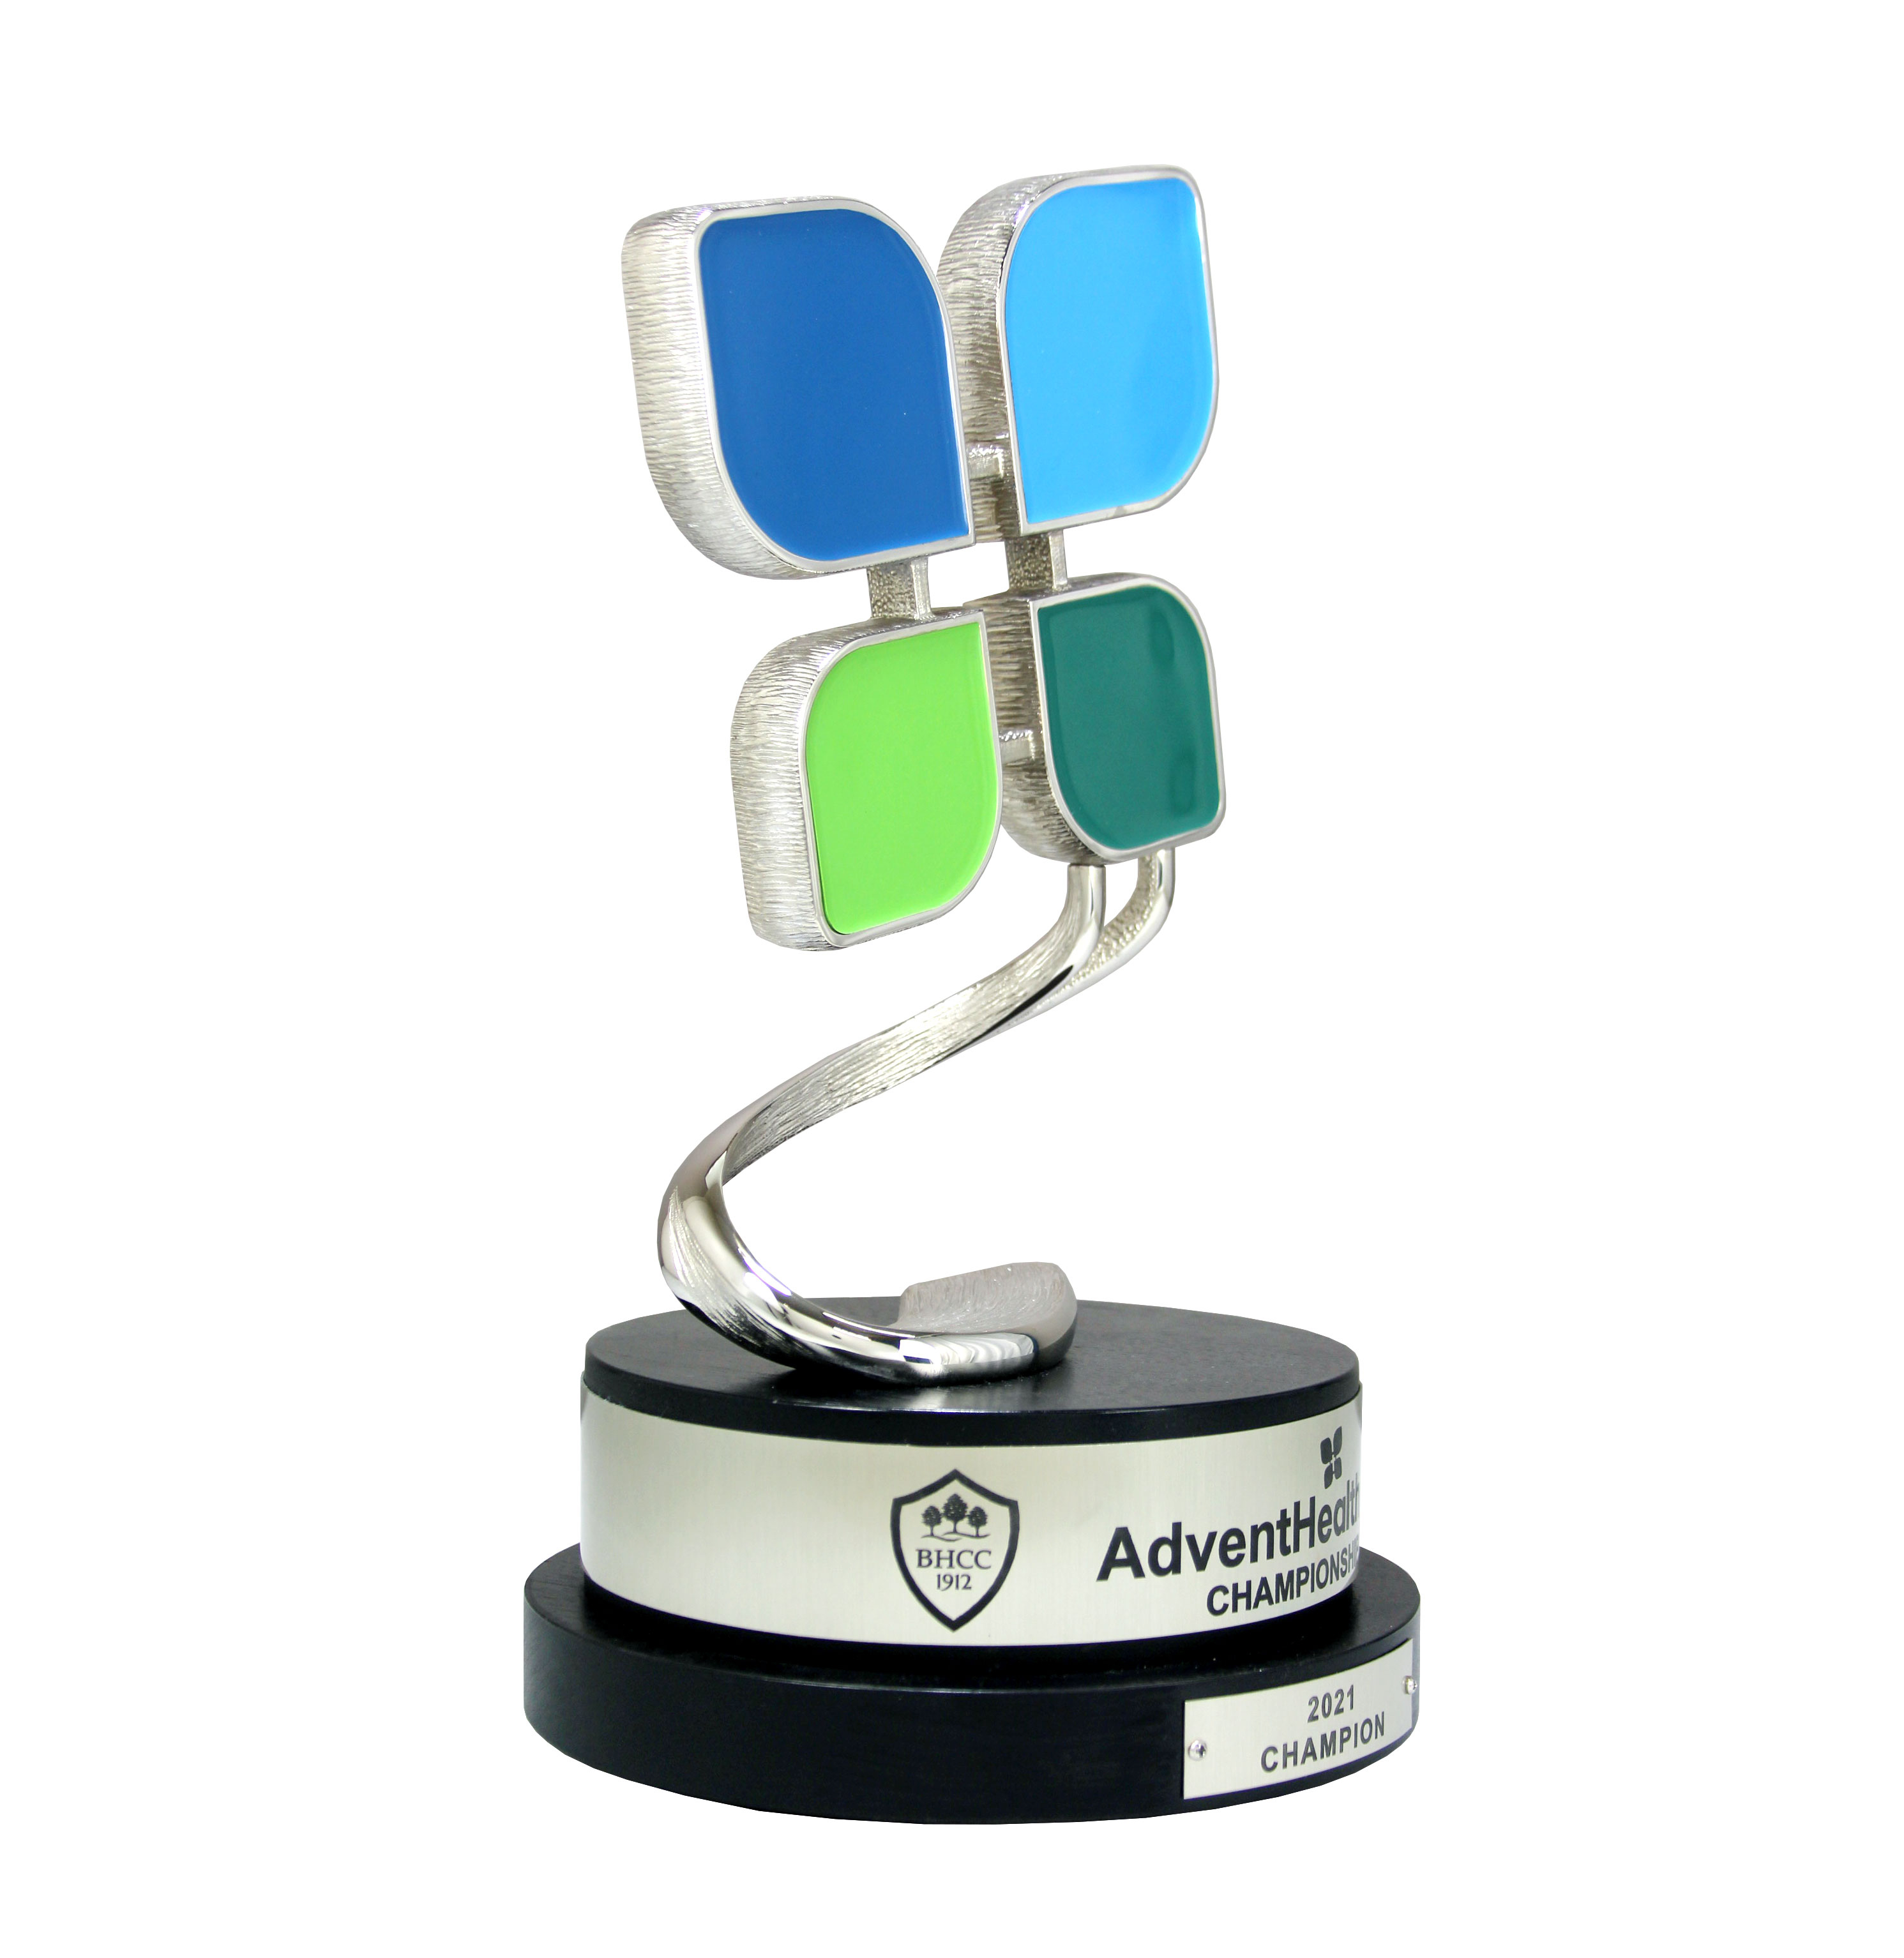 AdventHealth Championship Trophy made by Malcolm DeMille